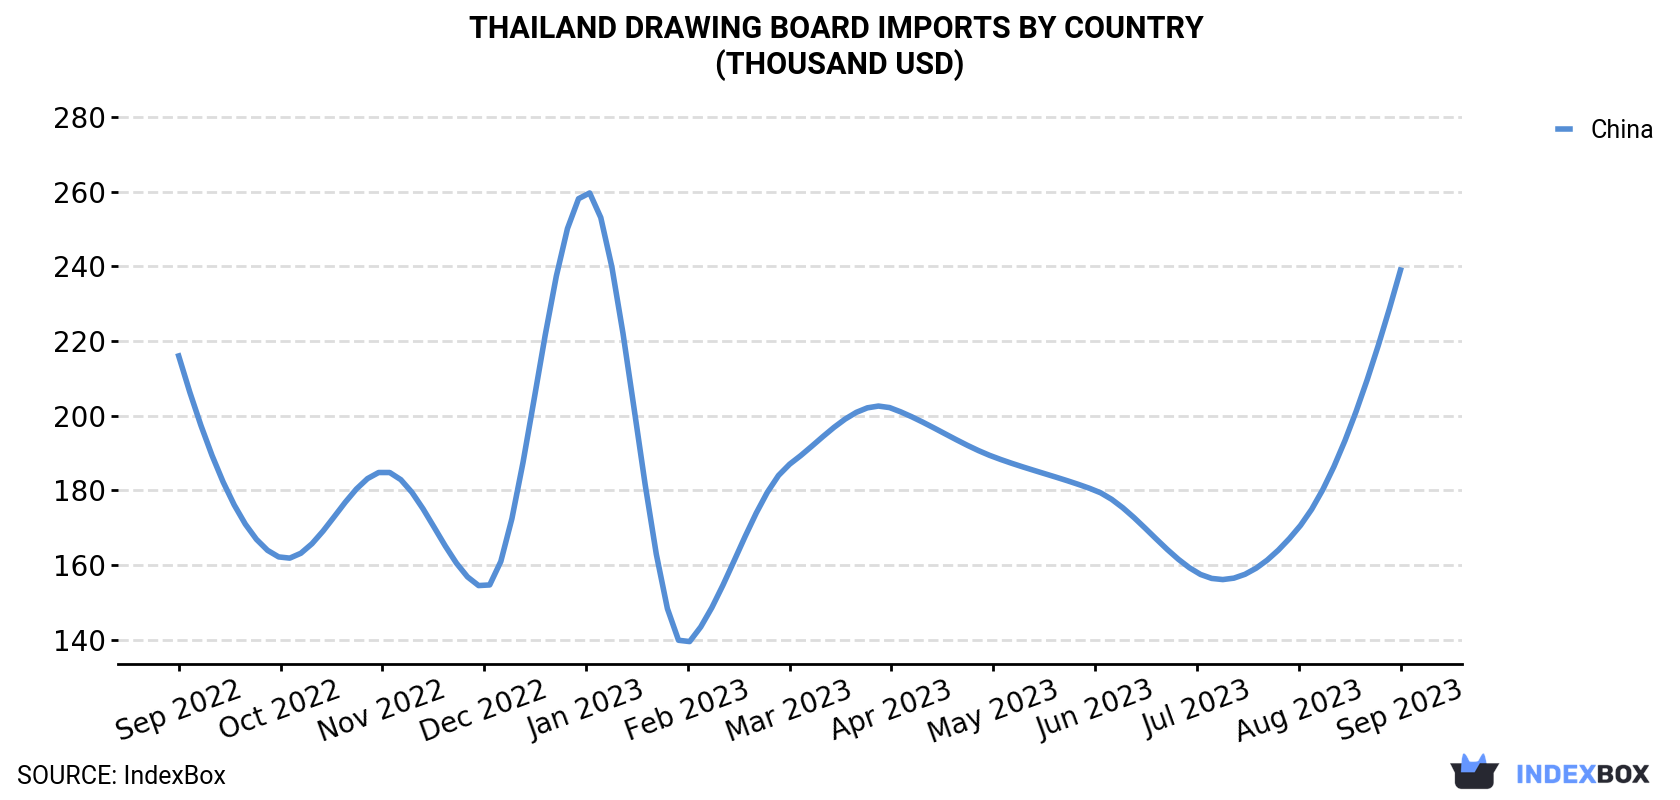 Thailand Drawing Board Imports By Country (Thousand USD)